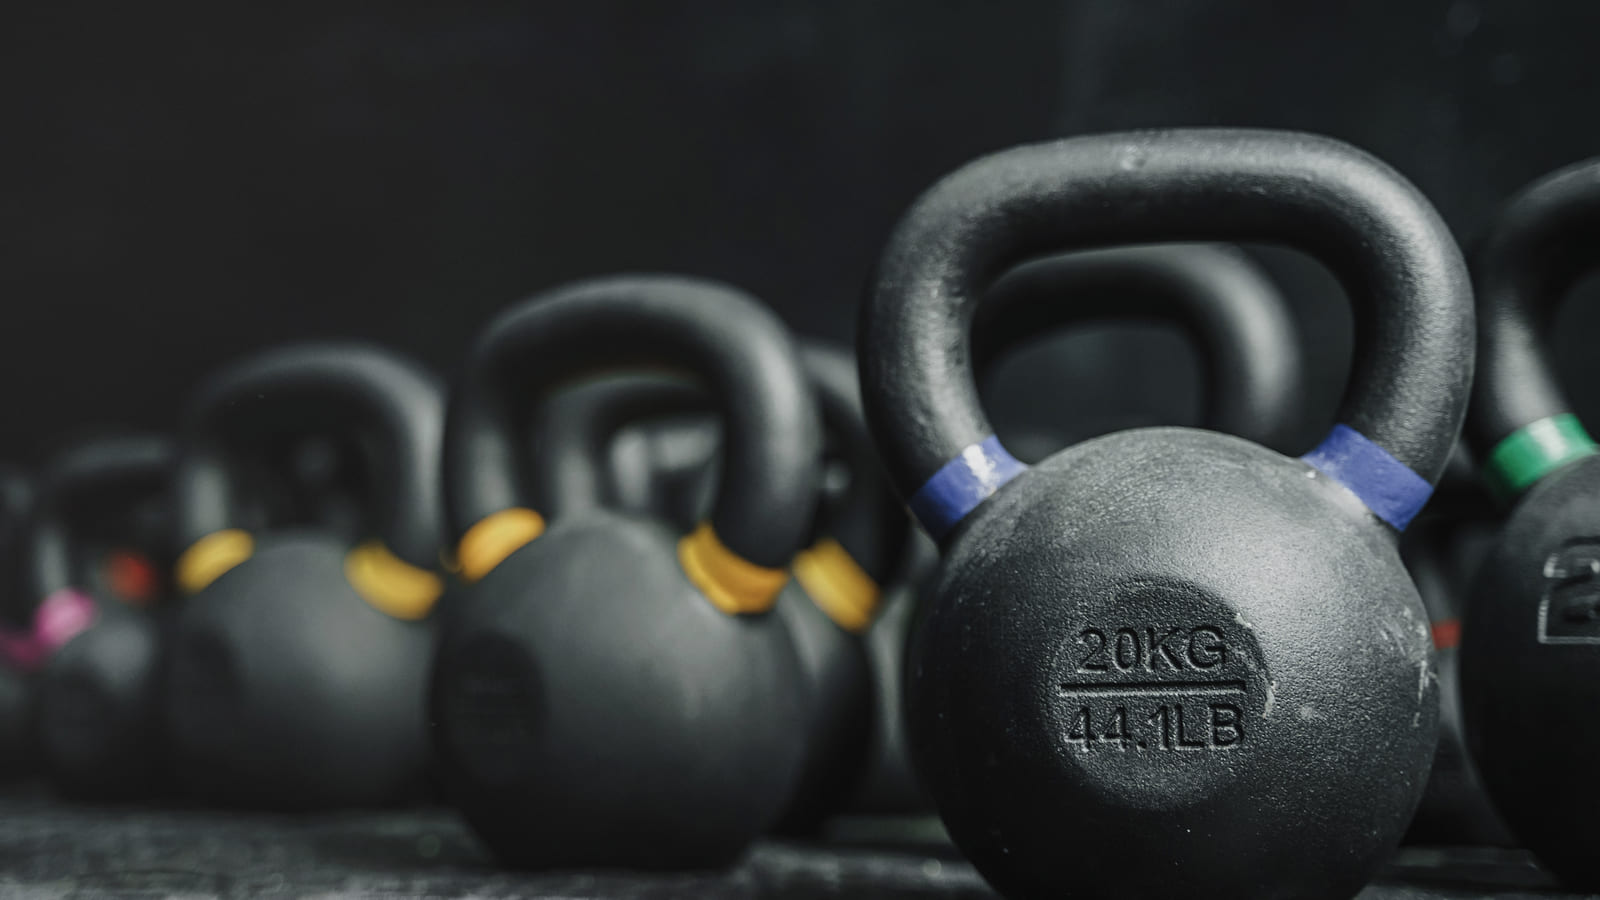 Kettlebell Exercises For Weight Loss